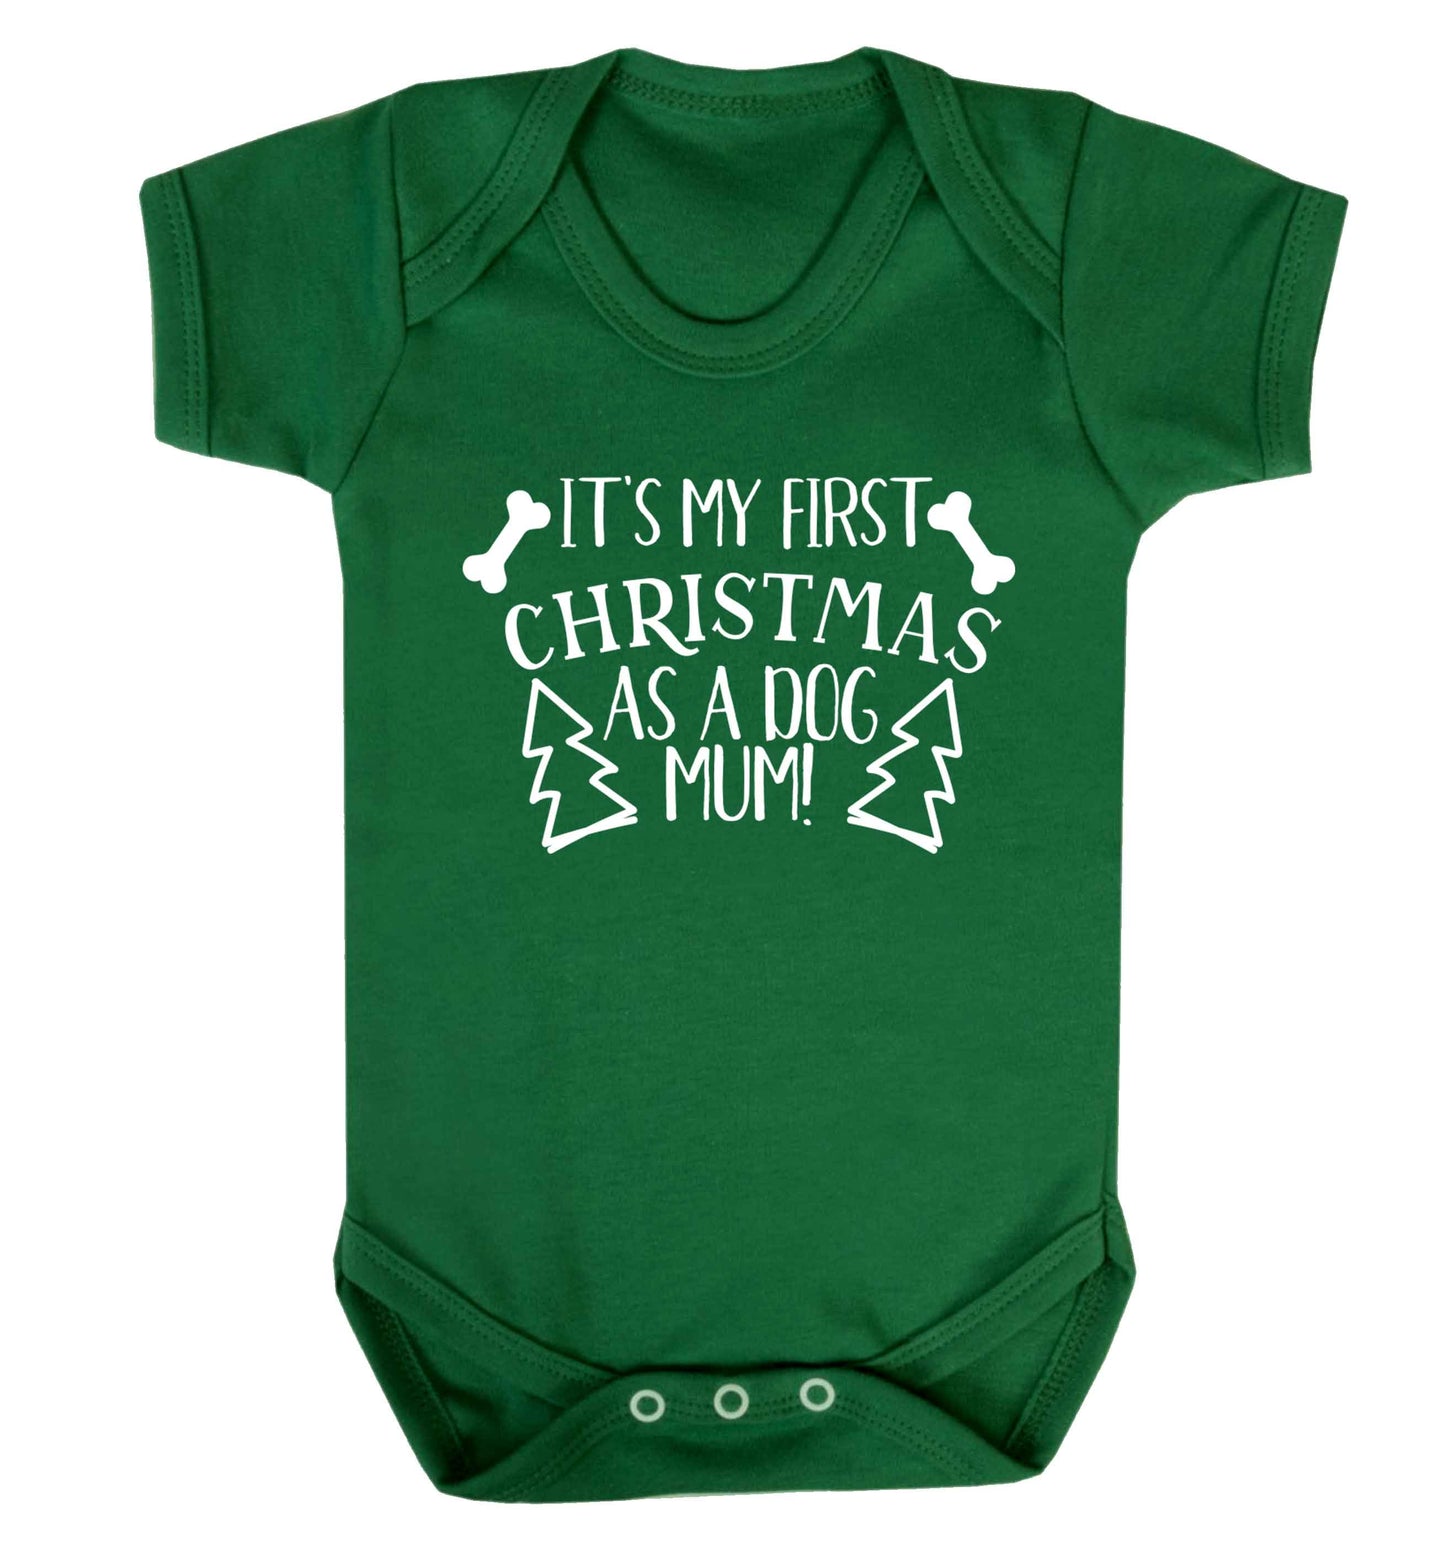 It's my first Christmas as a dog mum! Baby Vest green 18-24 months